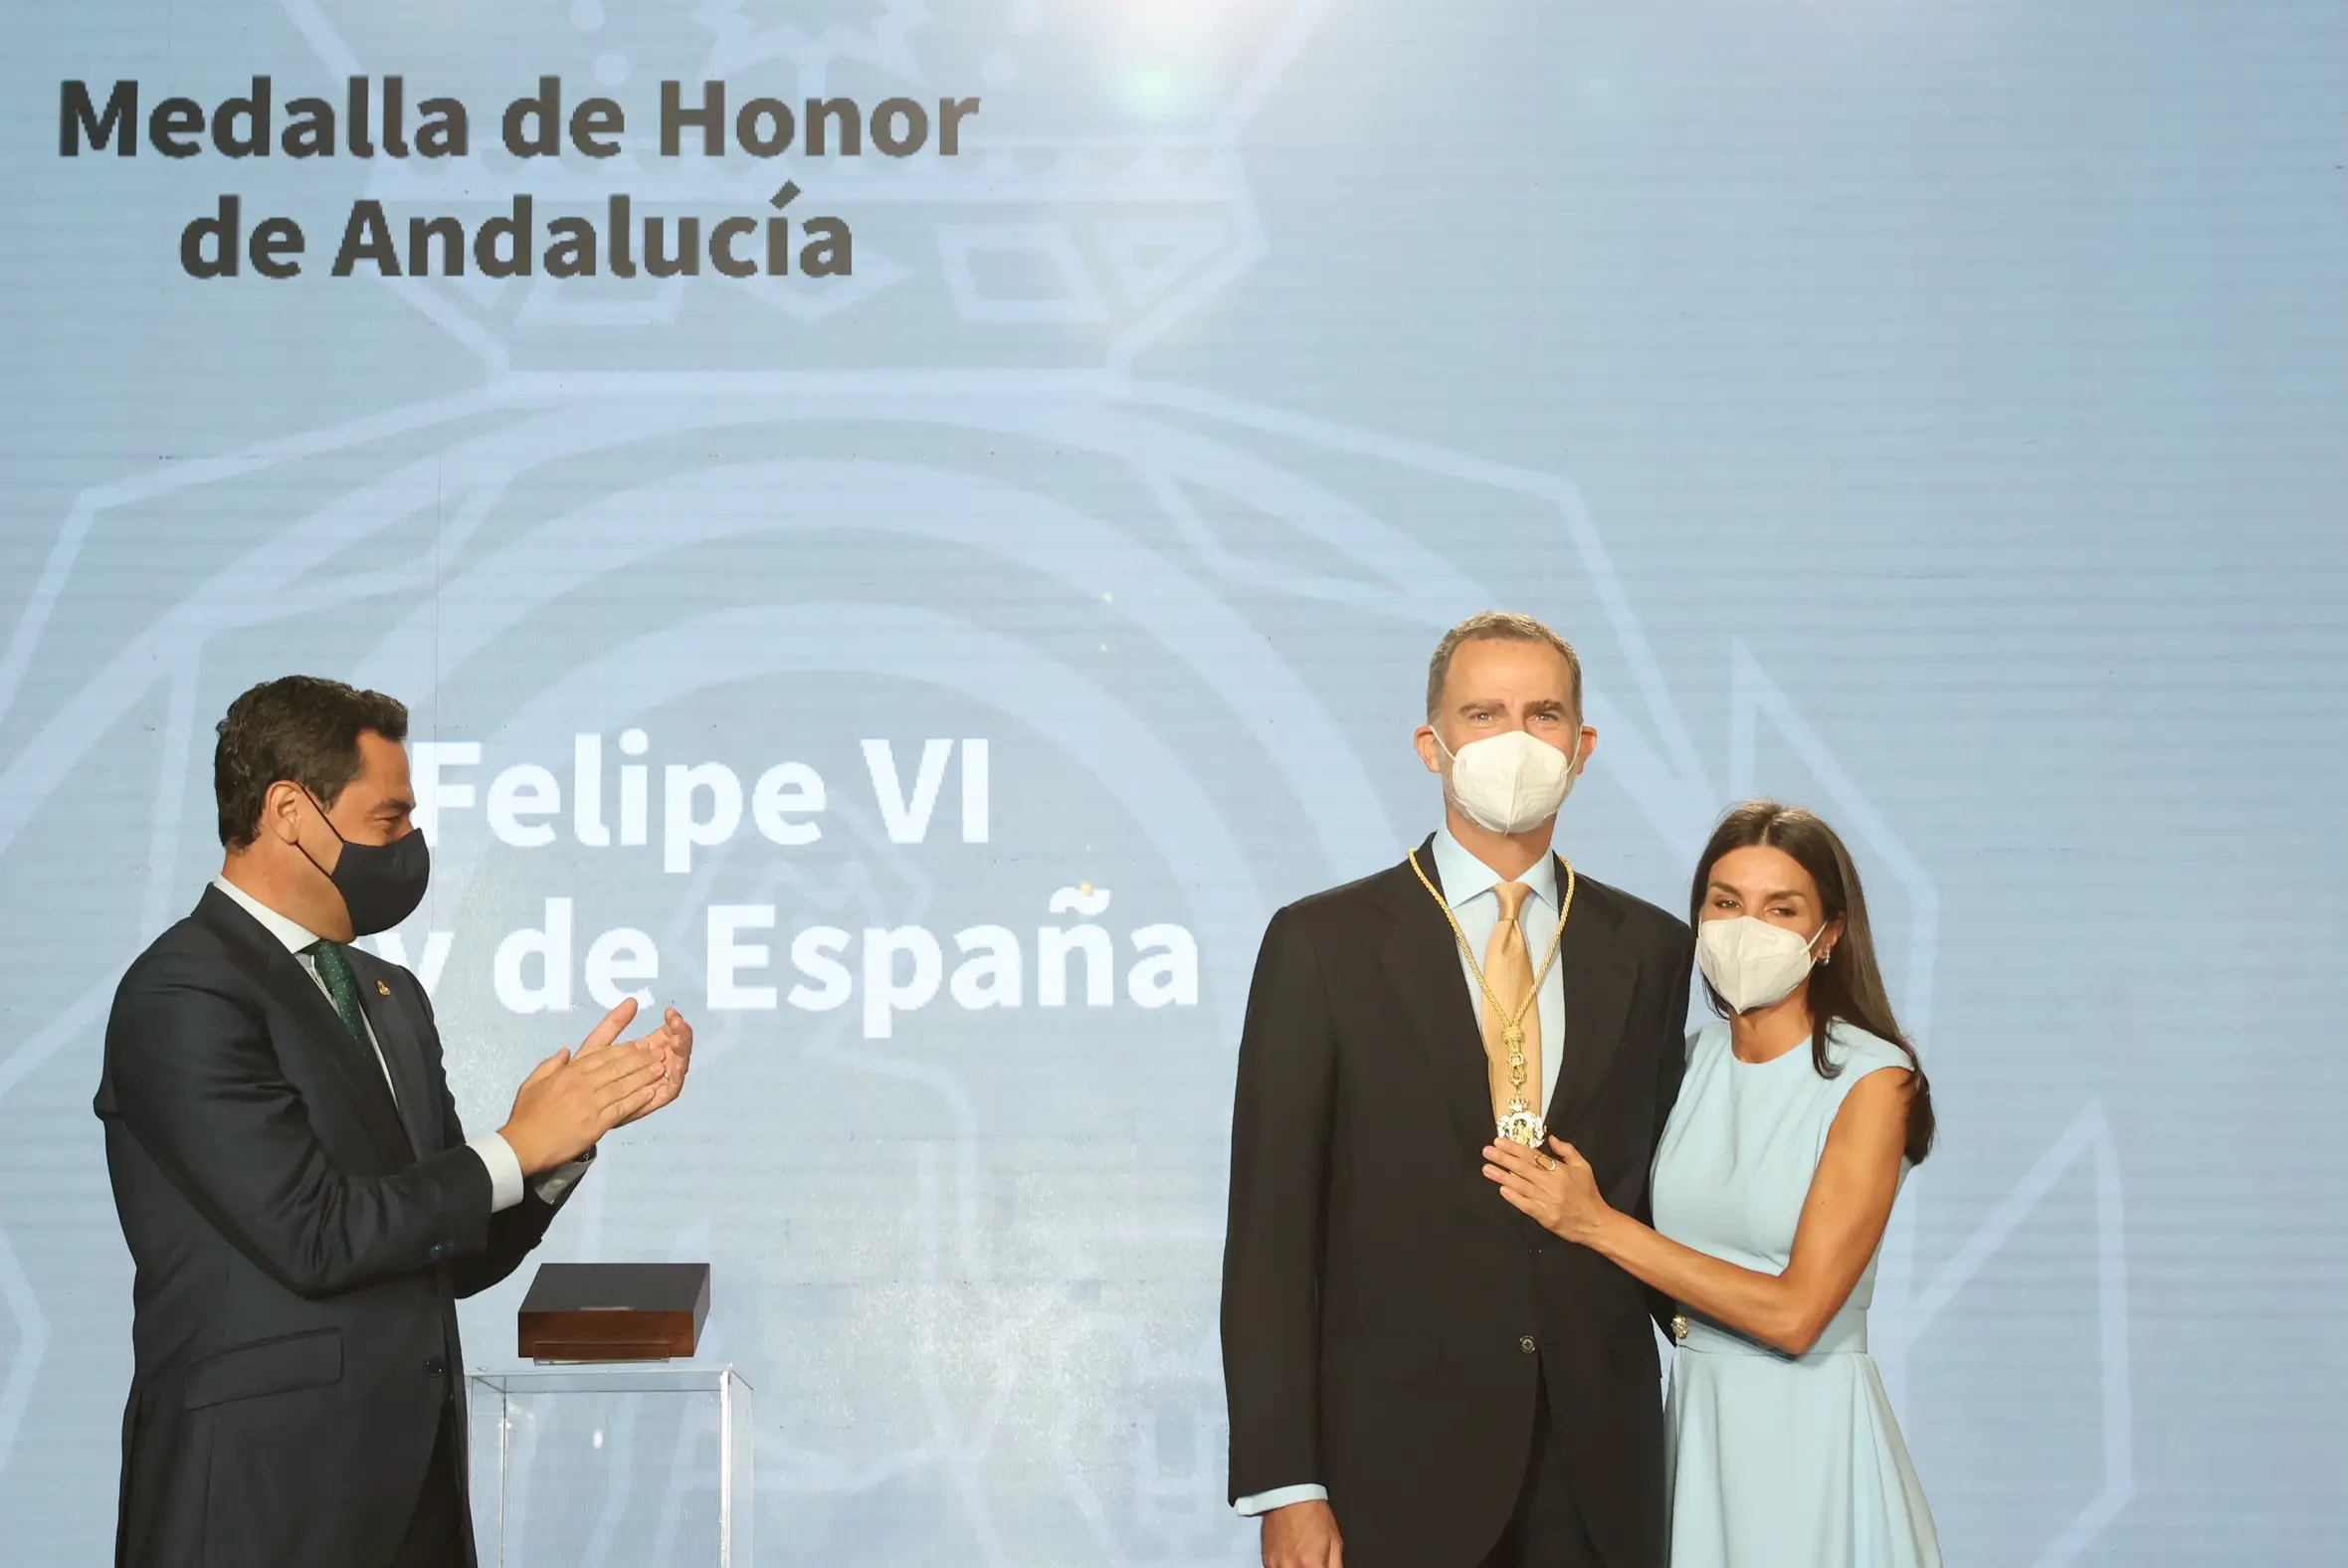 The King and Queen attended an event at the Palace of San Telmo where King Felipe was presented with the first Medal of Honor of Andalusia.